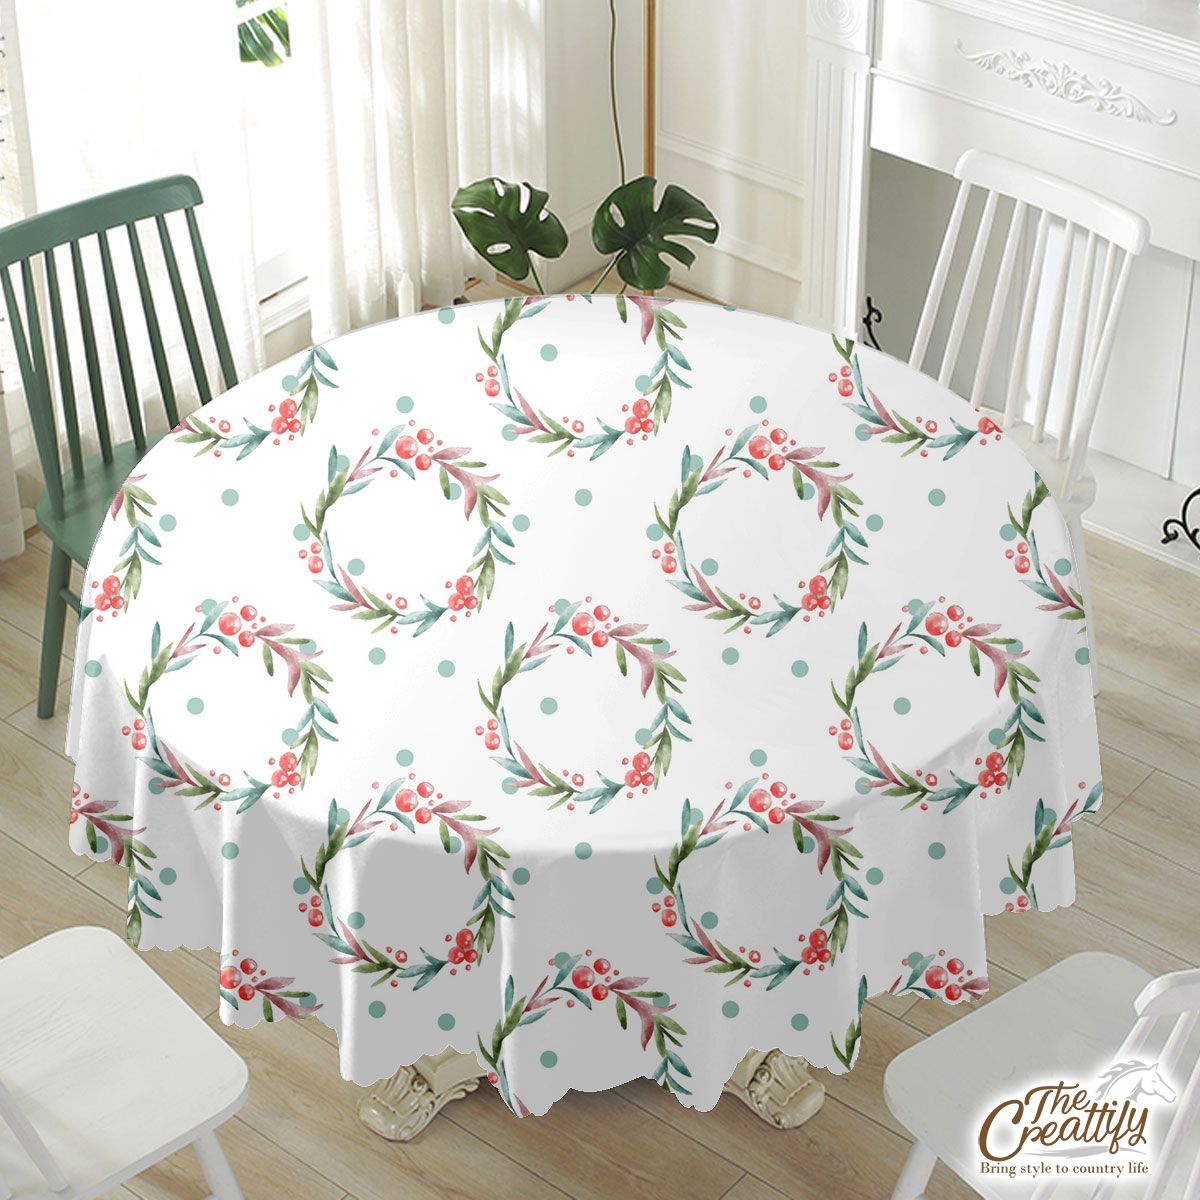 Christmas Wreath On White Background Waterproof Tablecloth